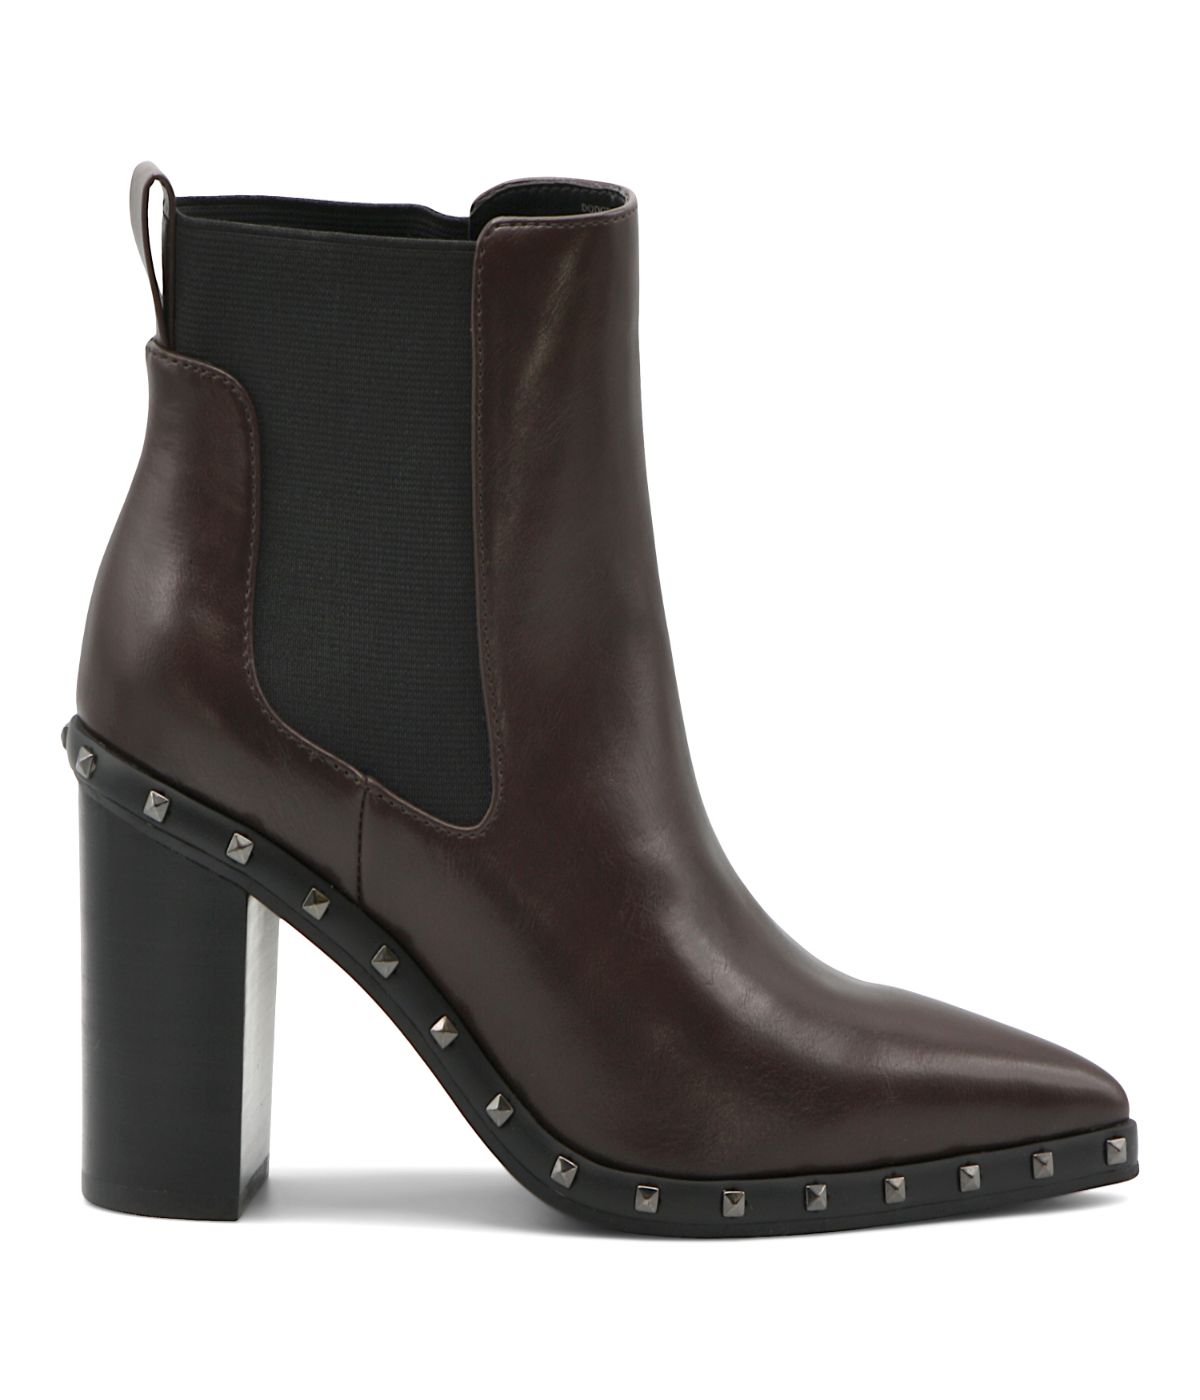 Charles by Charles David Dodger Boot Chocolate